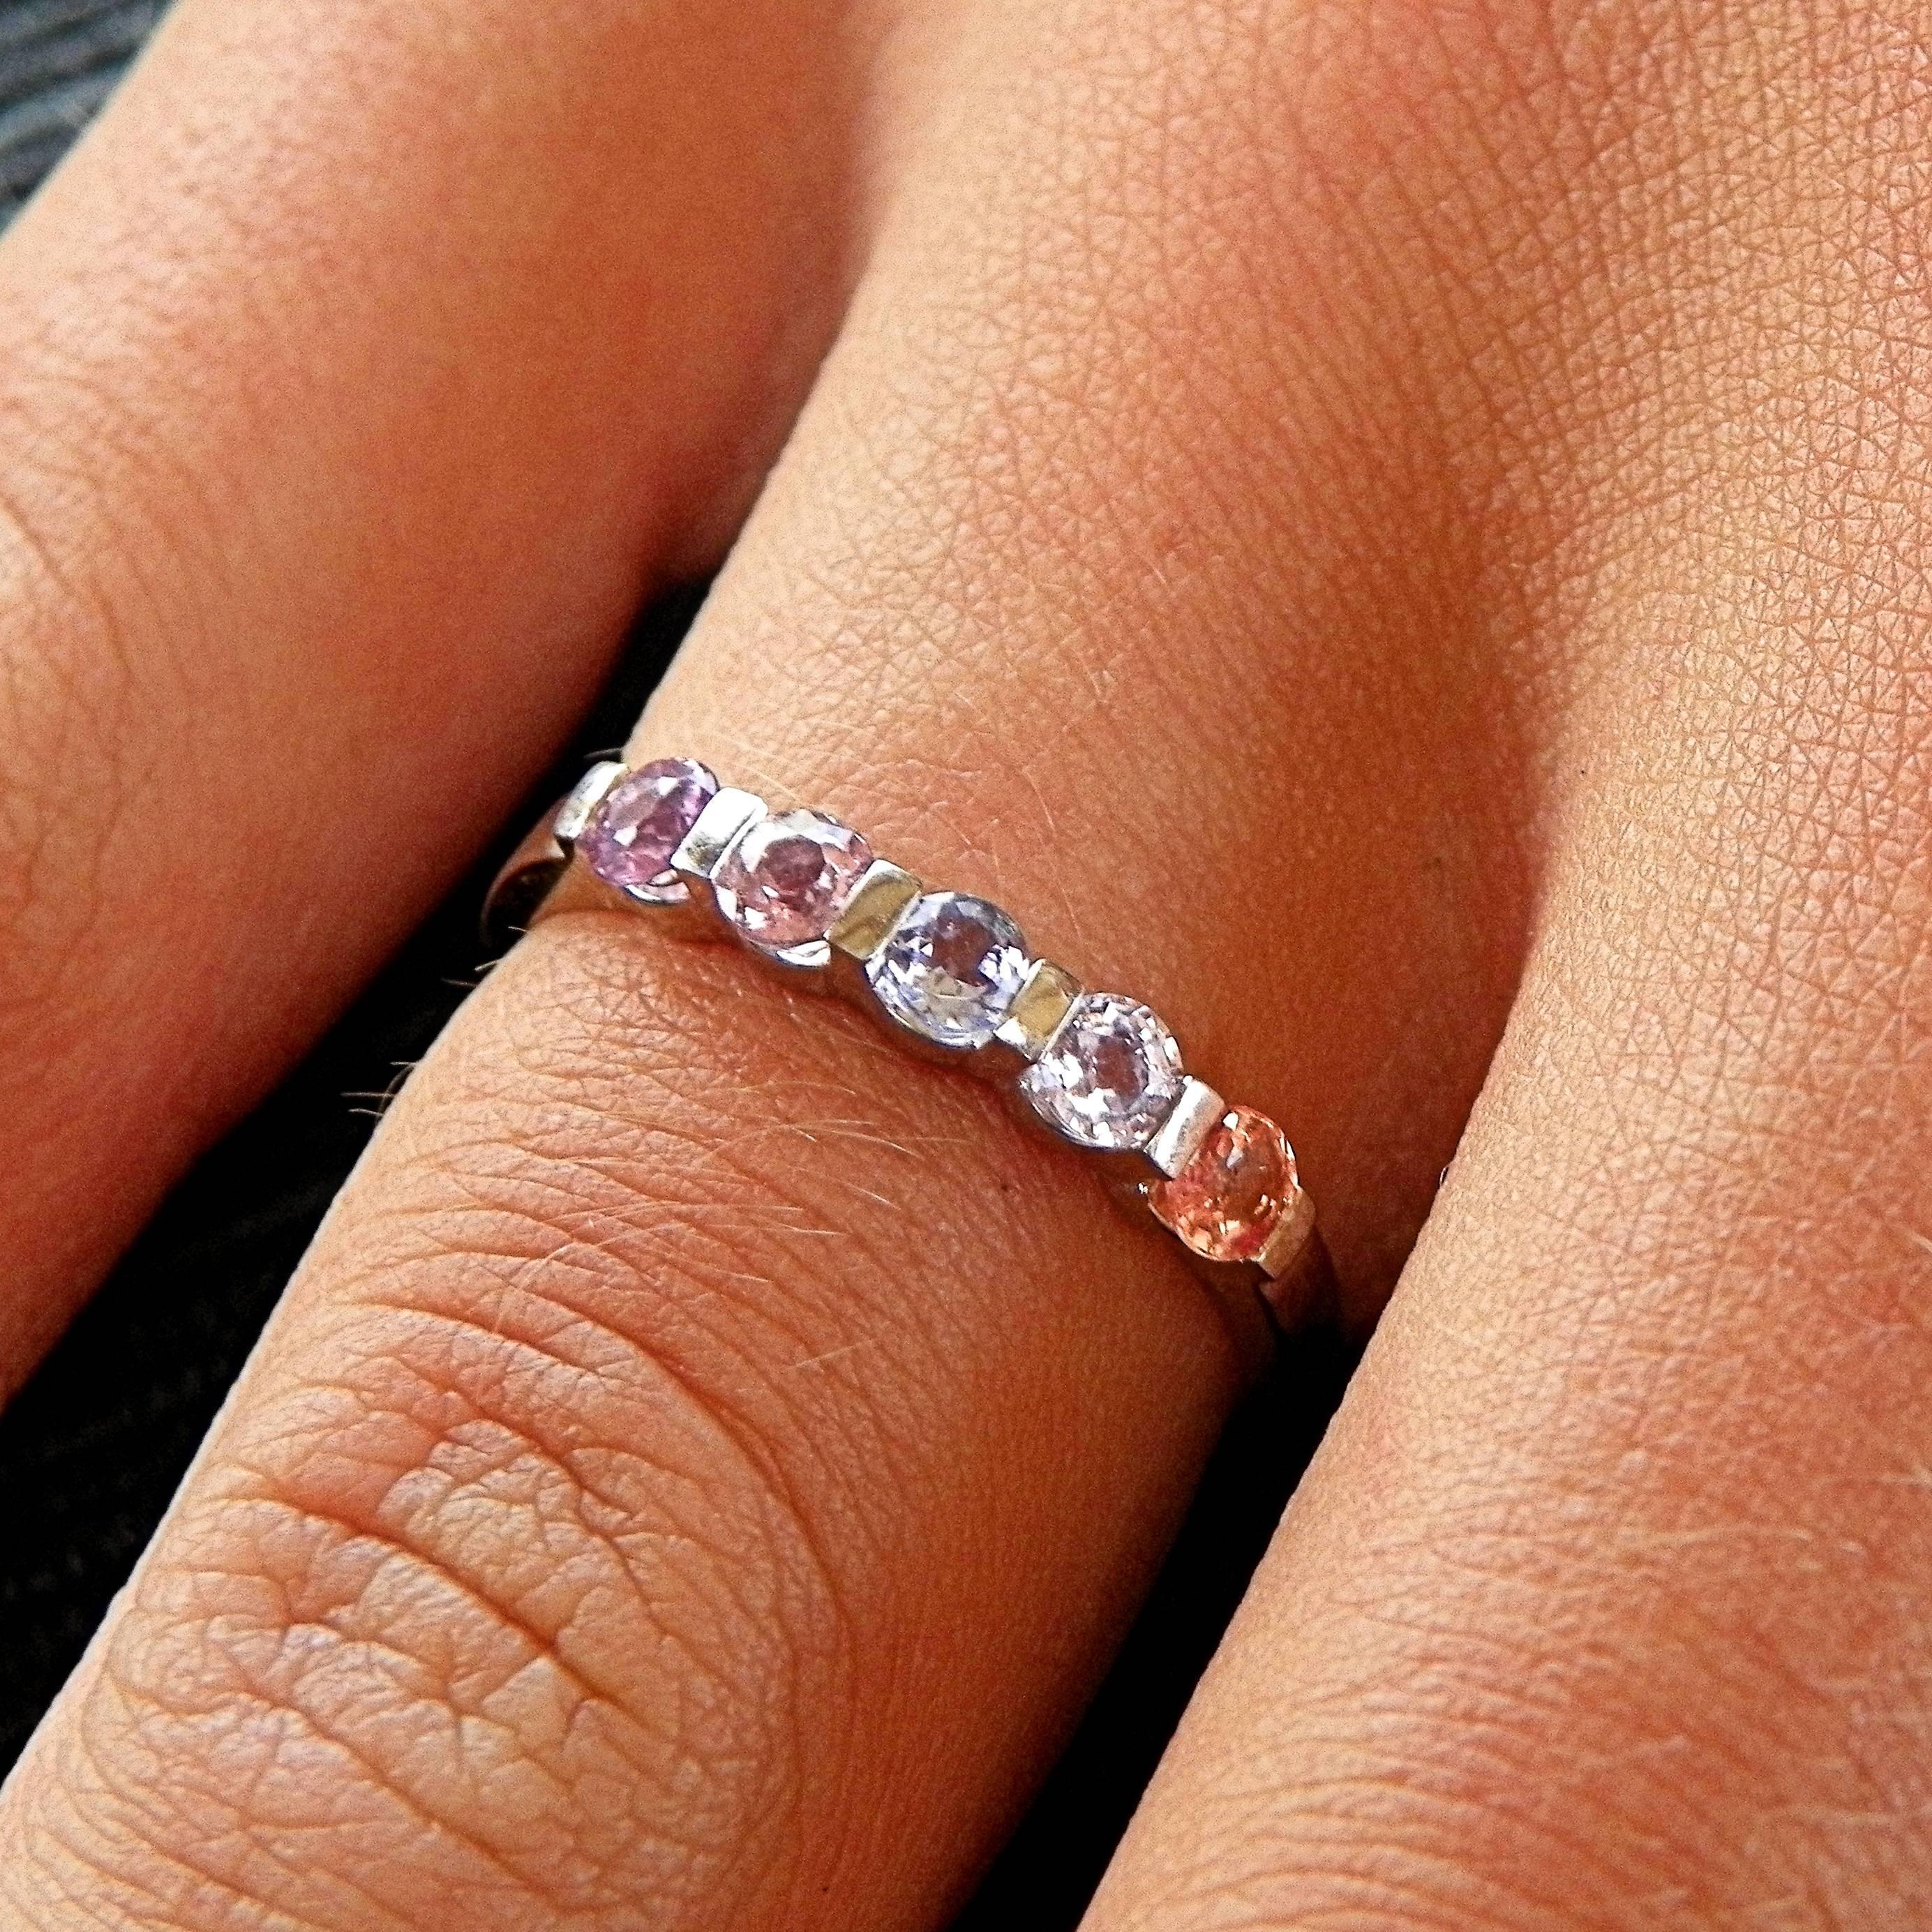 Multicoloured bright Sapphire 14 K White Gold Eternity Stacking Ring with 5 fany light coloured orange, blu and pink sapphires. 
This unique and handmade ring can be worn alone or with other rings and makes the perfect Mother's day gift for a sunny